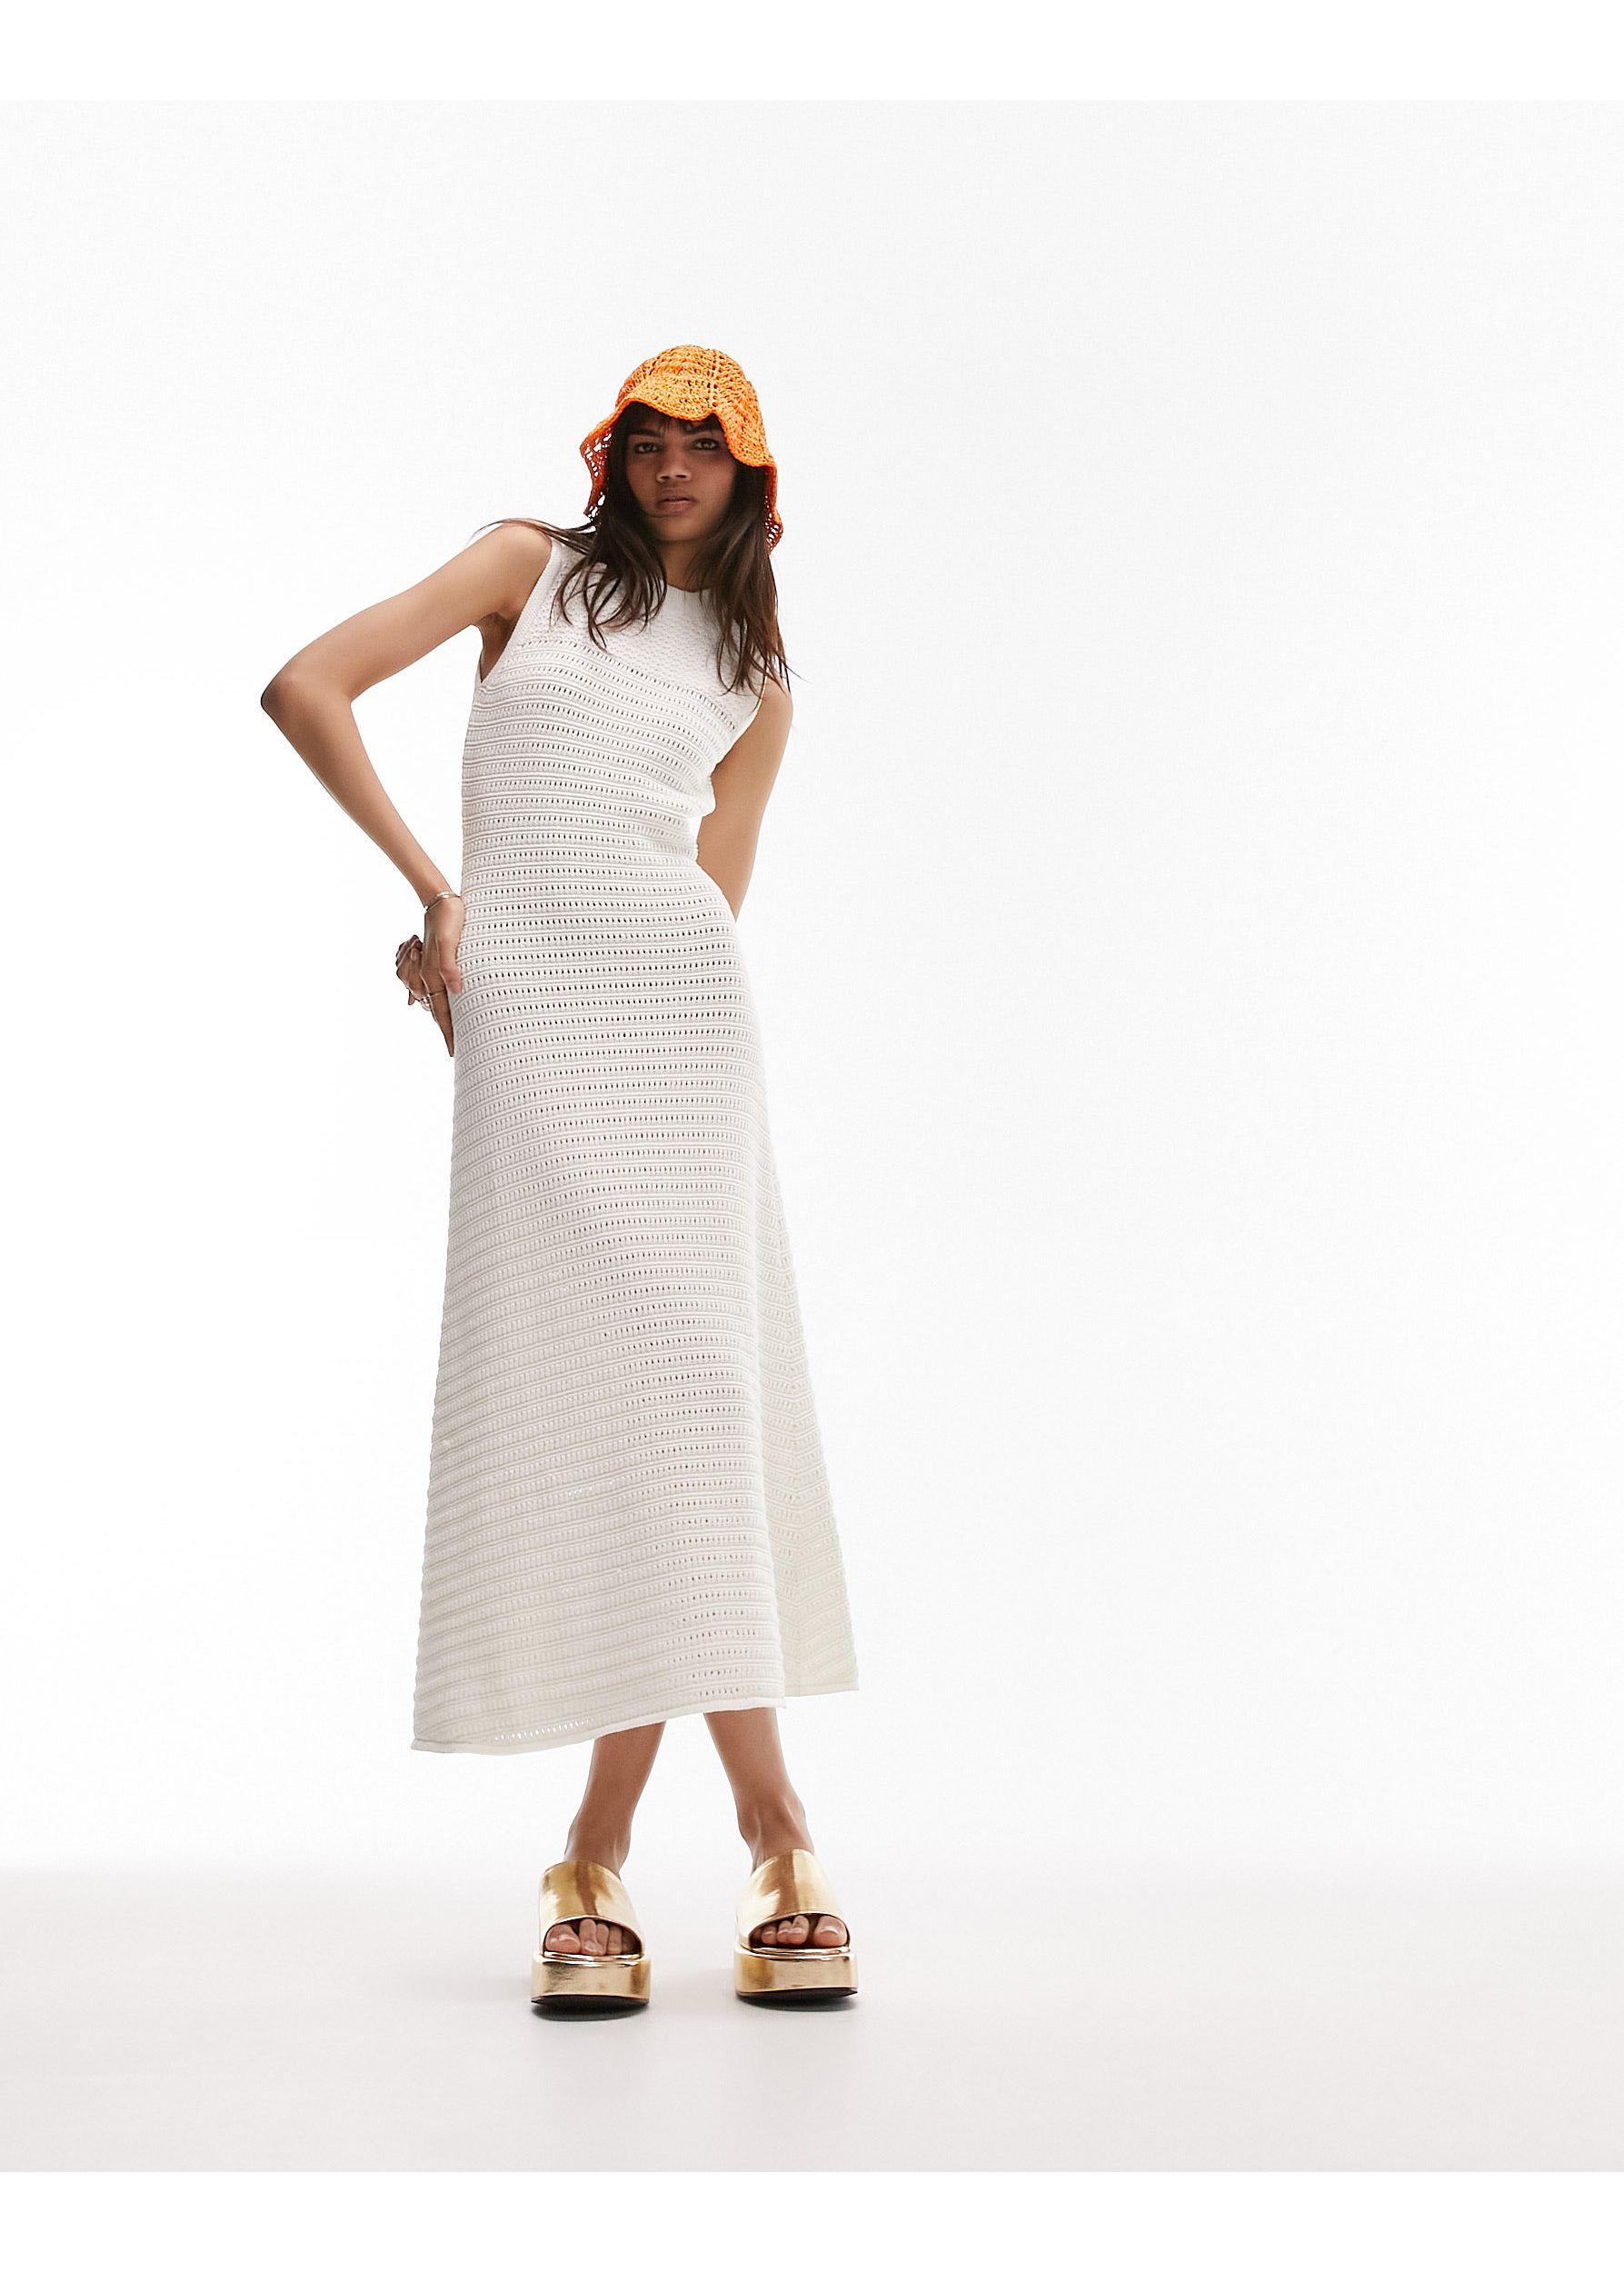 TOPSHOP Knitted Open Sleeveless Dress in White | Lyst